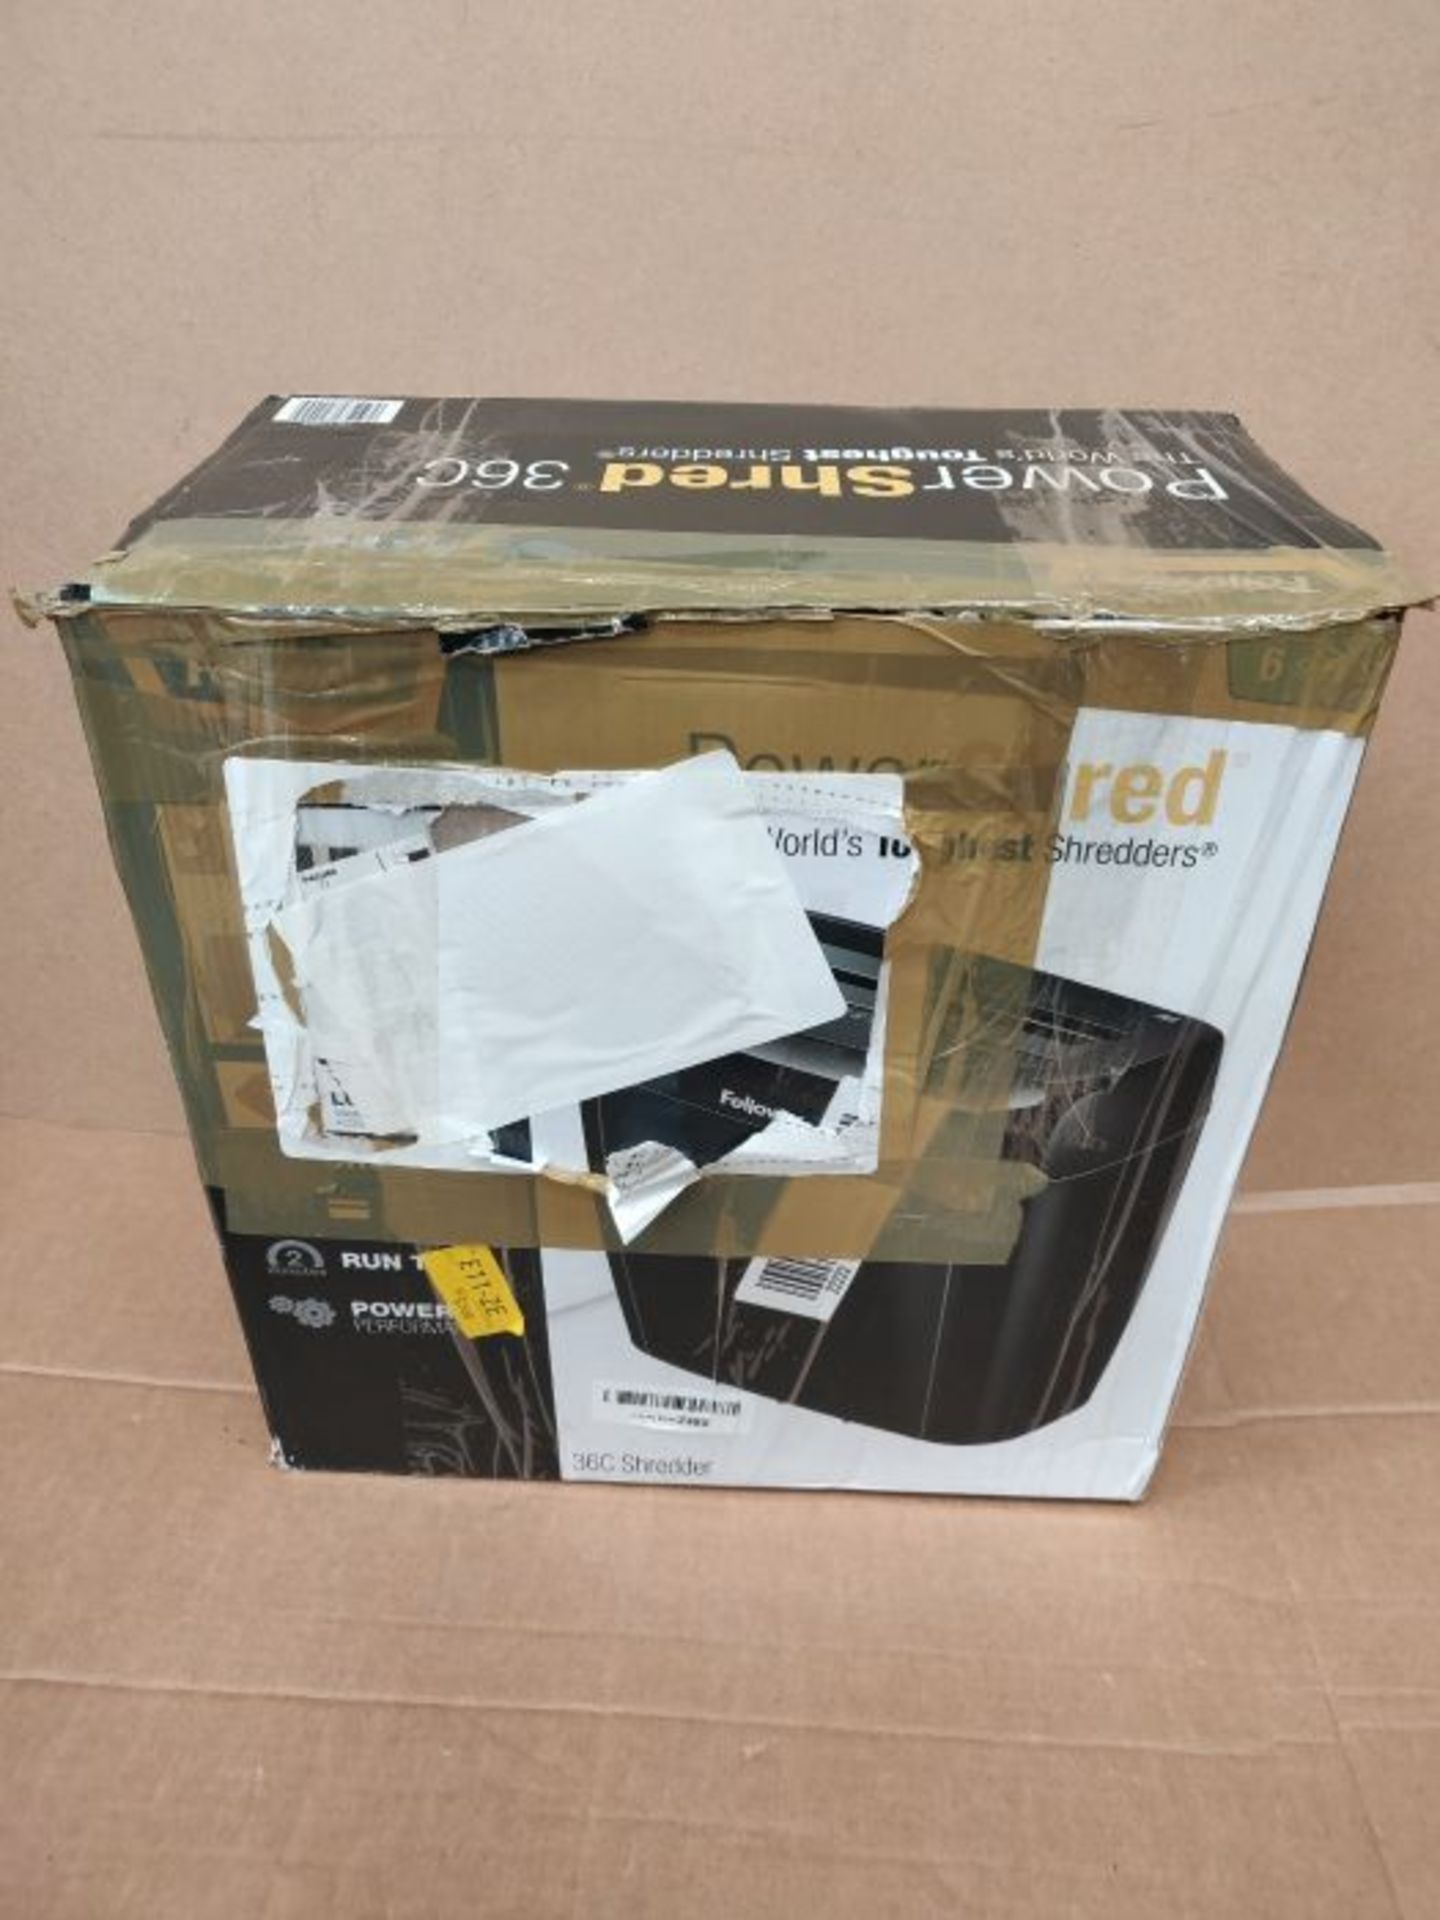 Fellowes Powershred 36C Cross Cut Personal Paper Shredder with Safety Lock for Home Us - Image 2 of 3